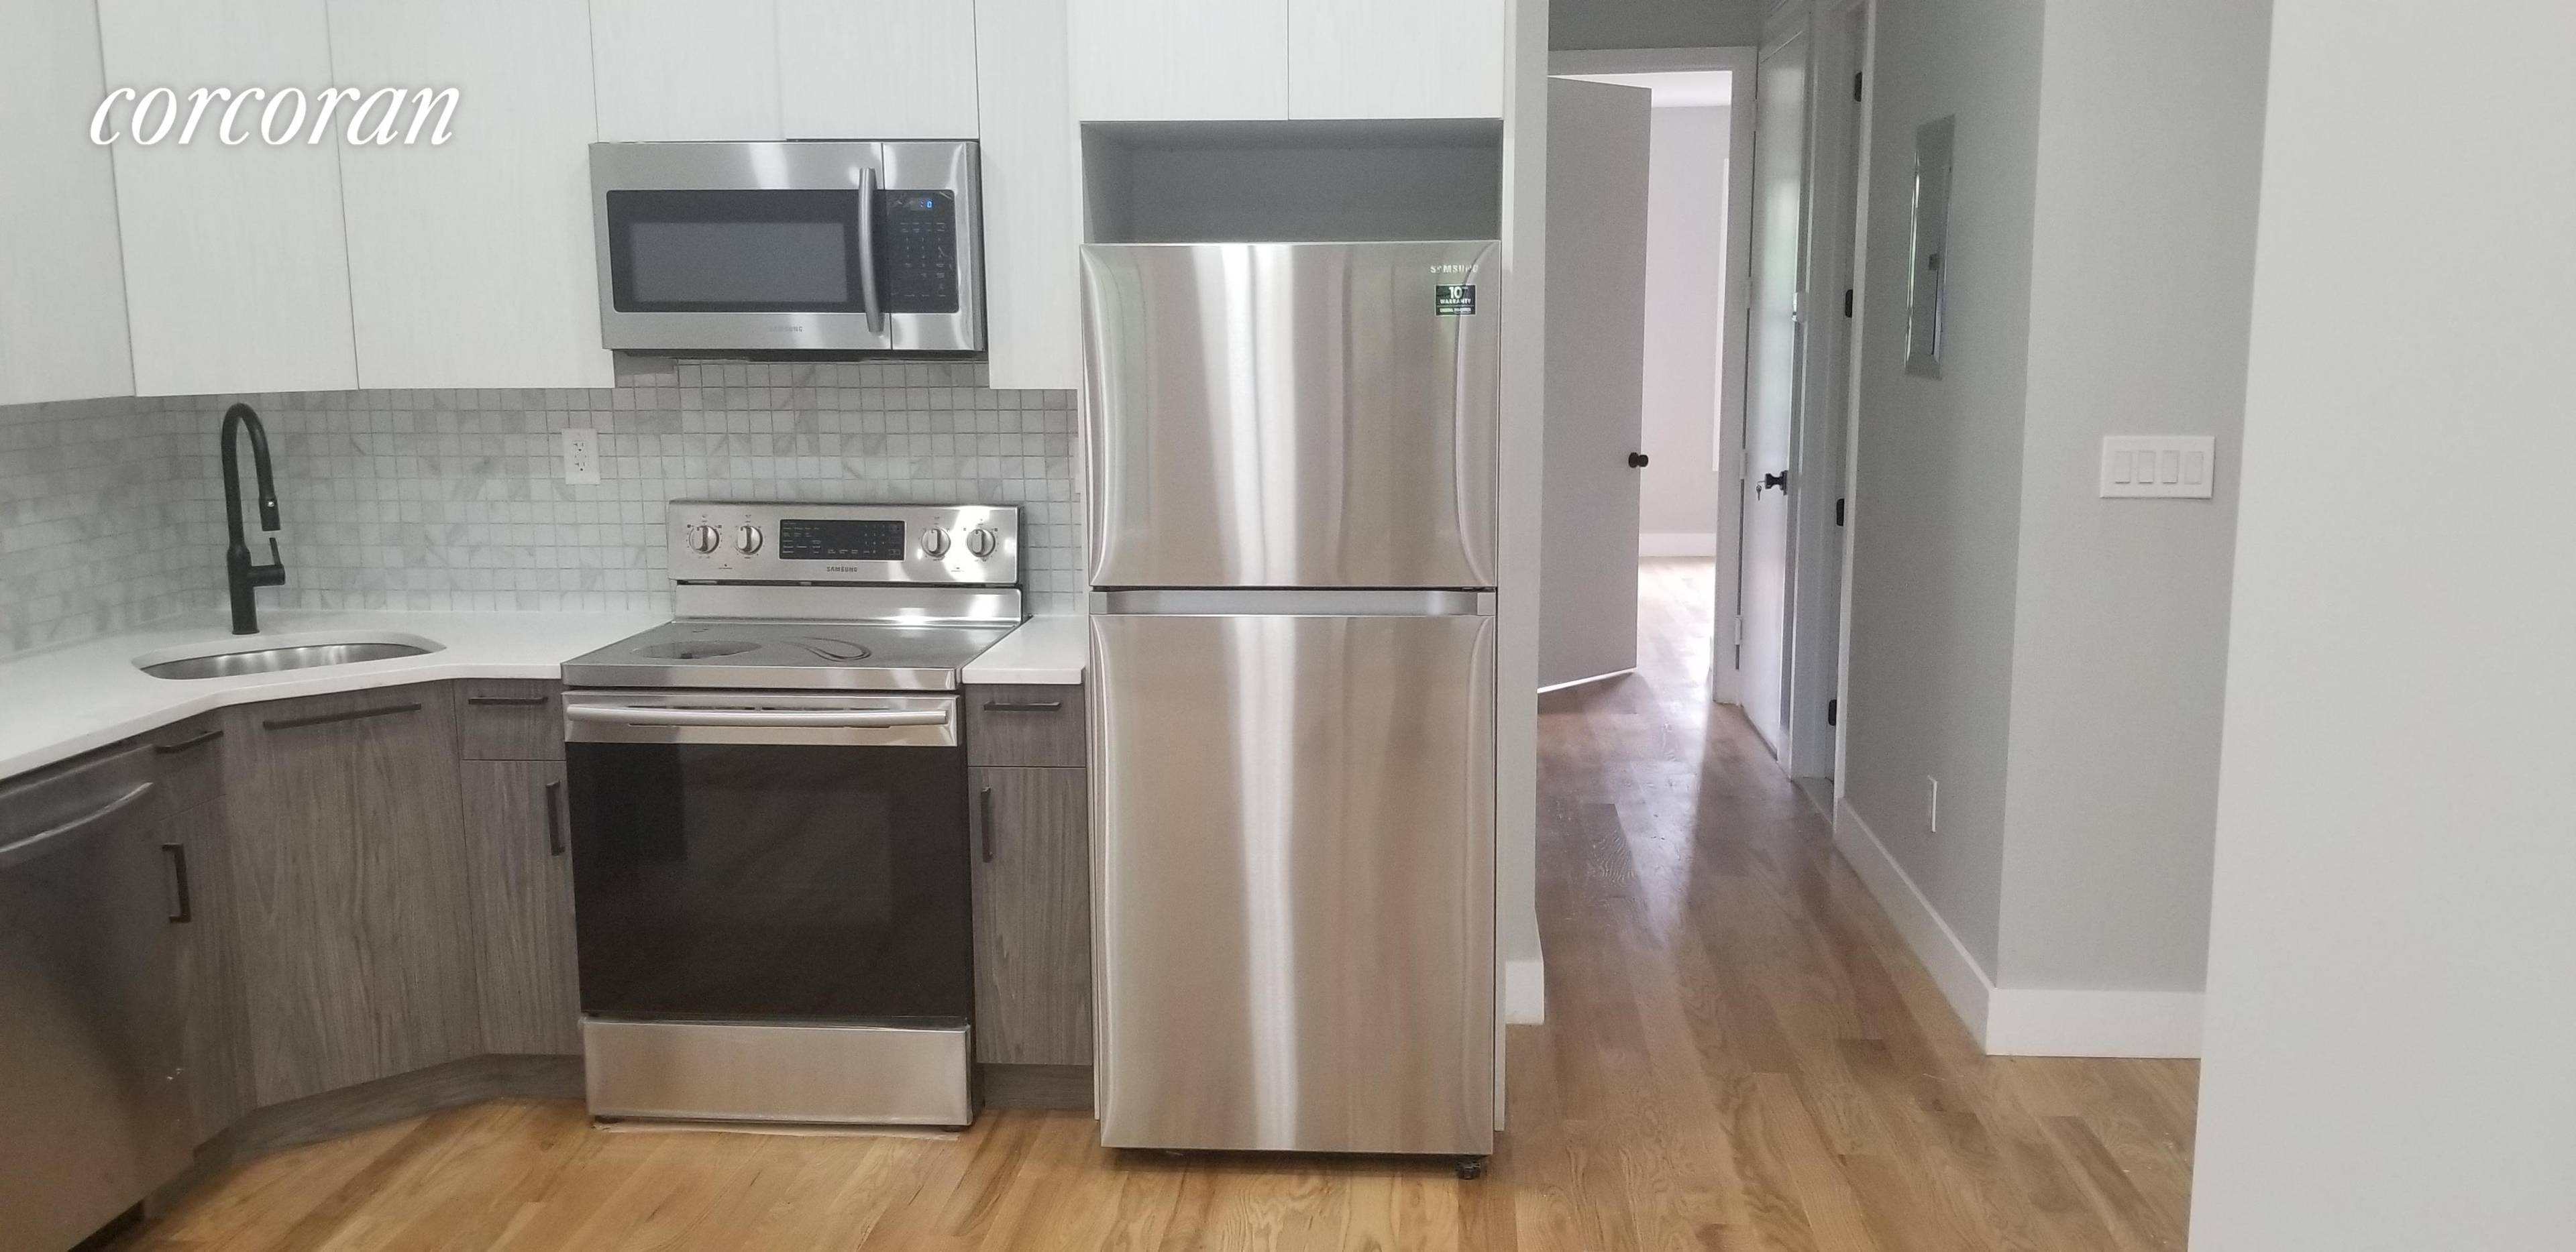 Lovely newly renovated 3 bedroom, 2 bath unit, in a lovely townhouse in the East New york area of Brooklyn, transportation is close by.